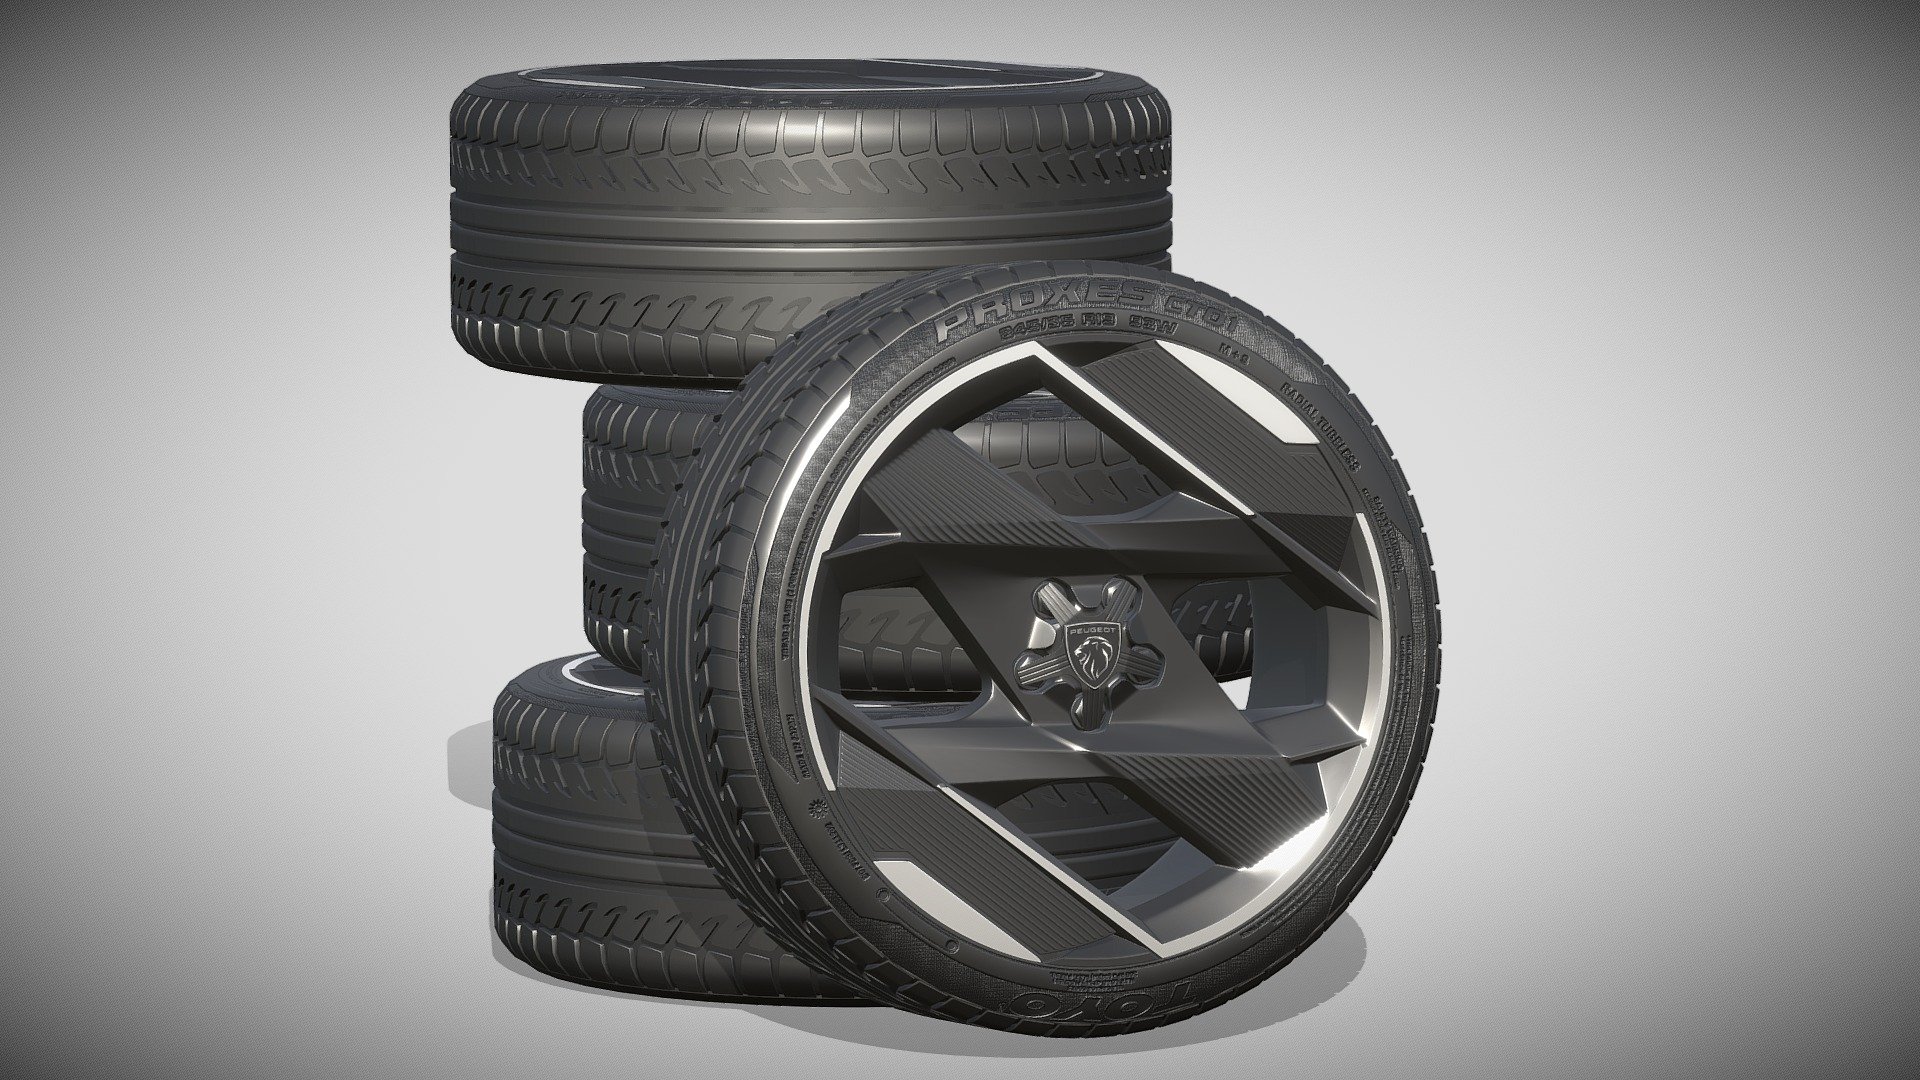 Peugeot wheels

Clean geometry Light weight model, yet completely detailed for HI-Res renders. Use for movies, Advertisements or games

Corona render and materials

All textures include in *.rar files

Lighting setup is not included in the file! - Peugeot wheels - Buy Royalty Free 3D model by zifir3d 3d model